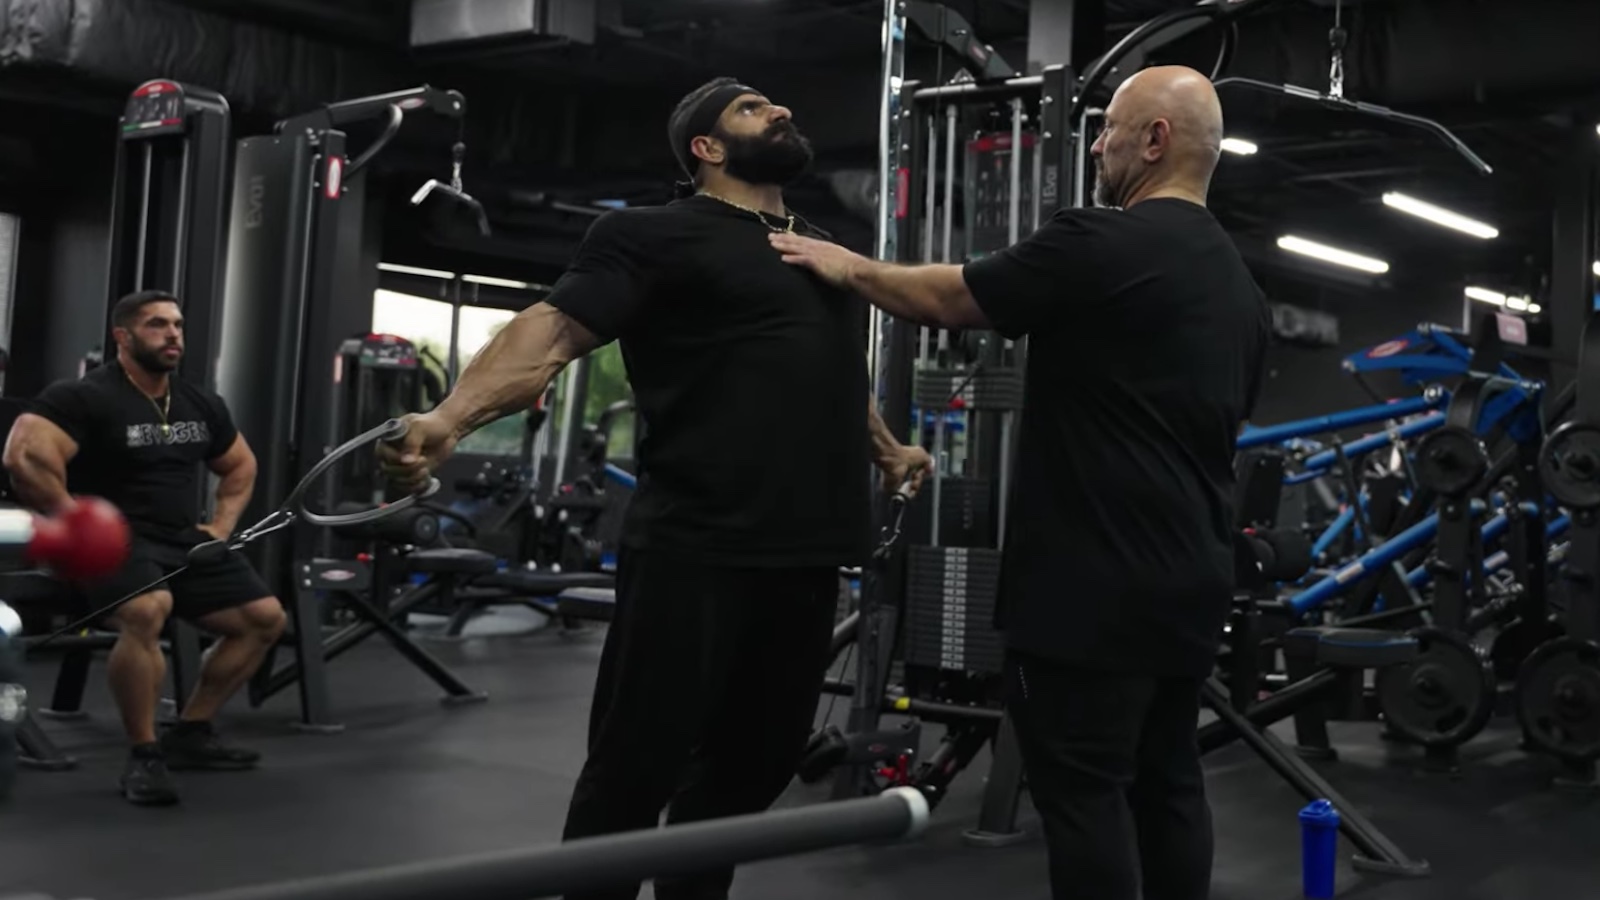 reigning-champ-hadi-choopan-and-top-contender-derek-lunsford-team-up-for-chest-workout-3-weeks-before-2023-mr.-olympia-–-breaking-muscle